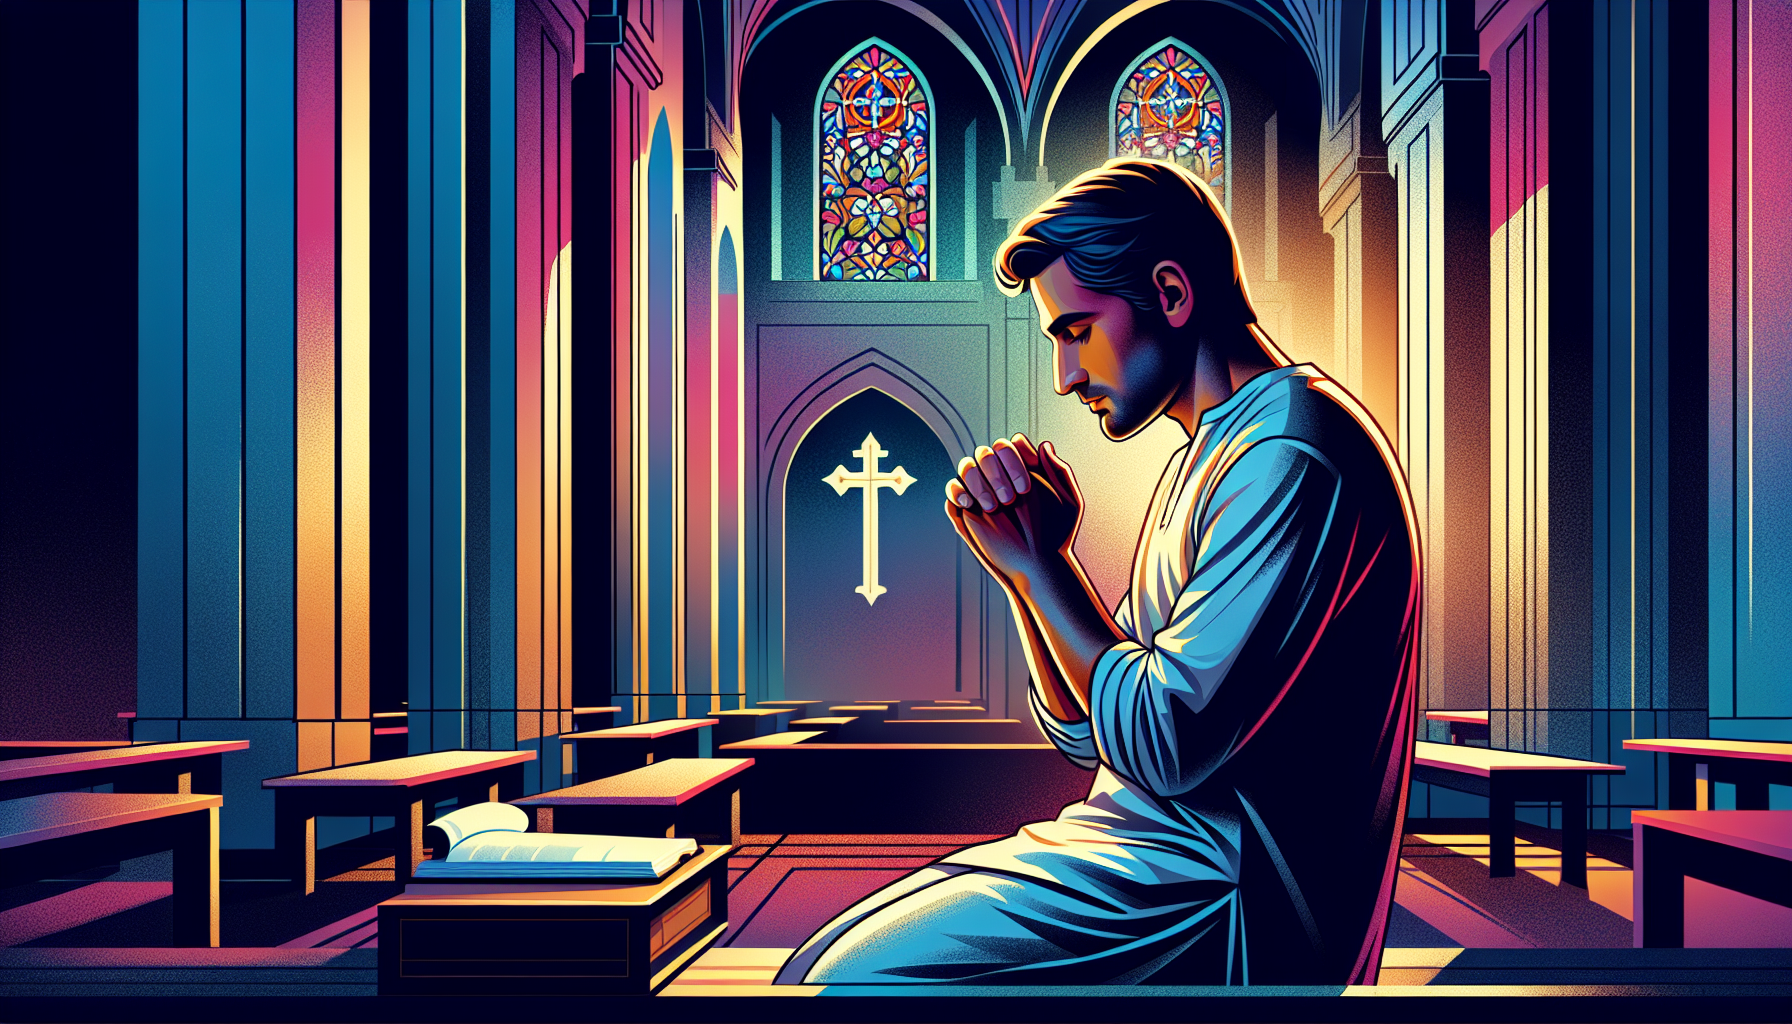 Create an illustration of a person kneeling in prayer with a serene expression, hands clasped together, in a quiet, dimly lit church. The atmosphere should be peaceful and contemplative, with soft lig